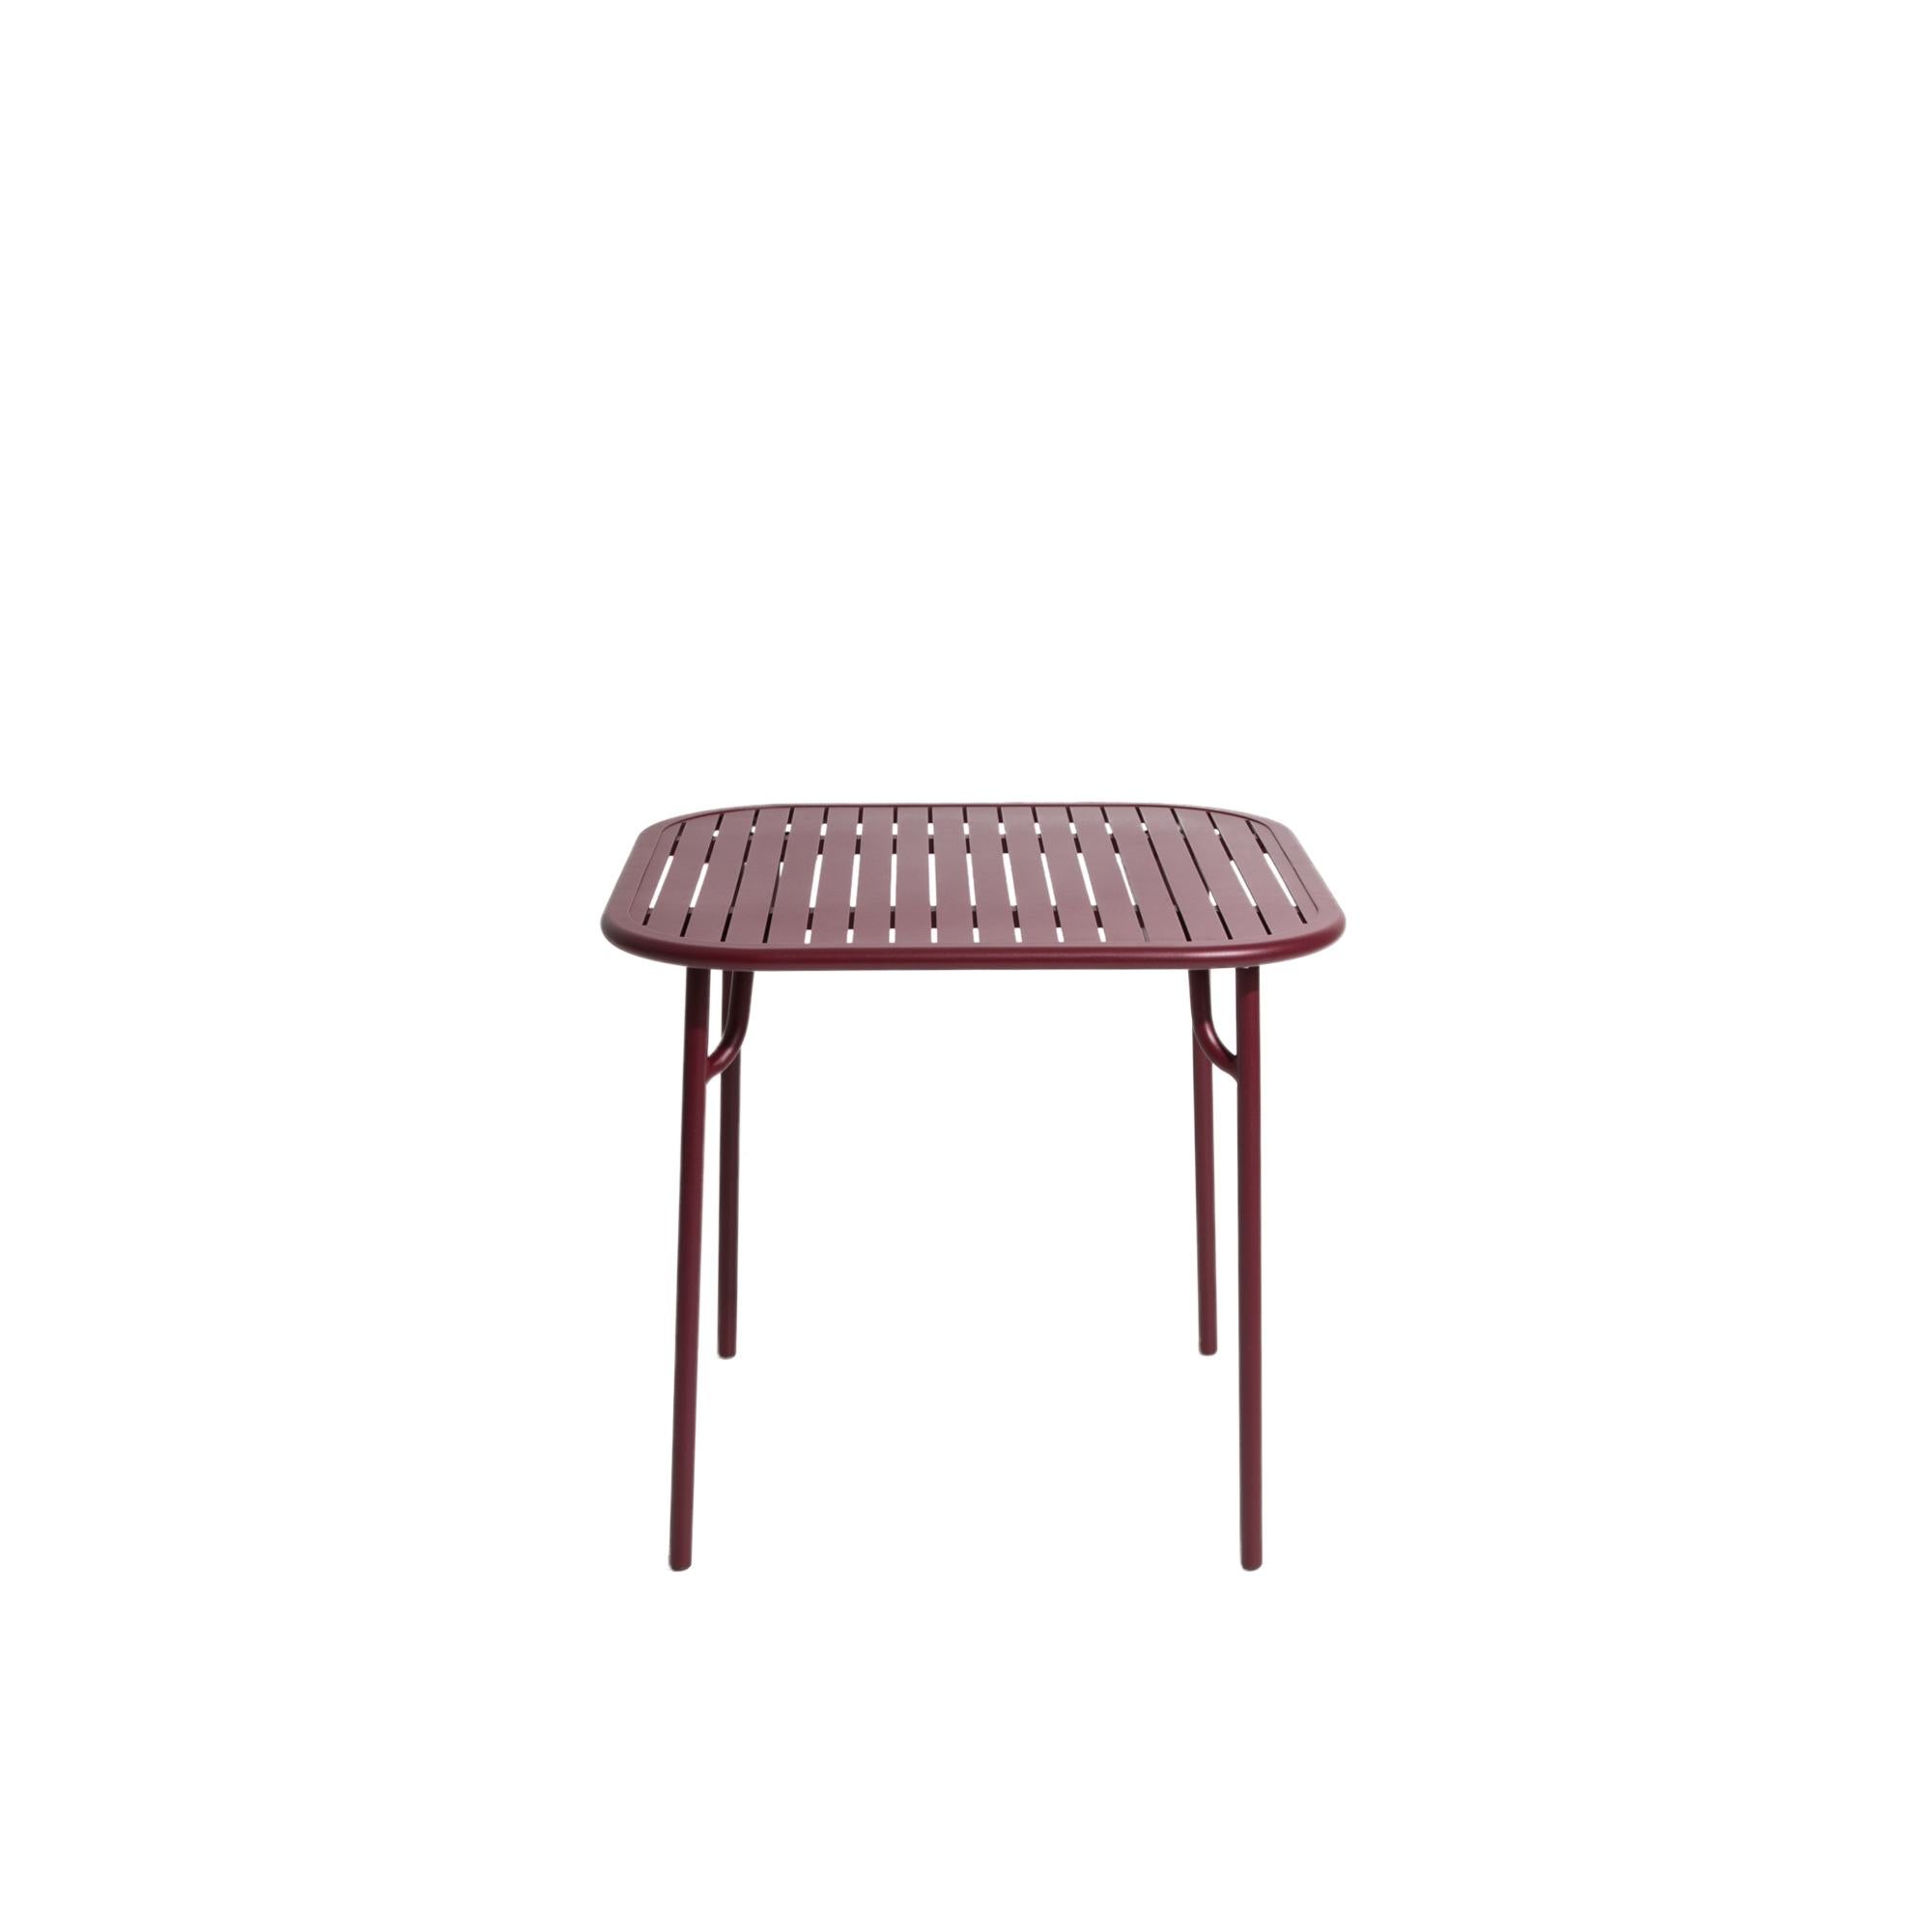 Petite Friture Week-End Square Dining Table in Burgundy Aluminium with Slats by Studio BrichetZiegler, 2017

The week-end collection is a full range of outdoor furniture, in aluminium grained epoxy paint, matt finish, that includes 18 functions